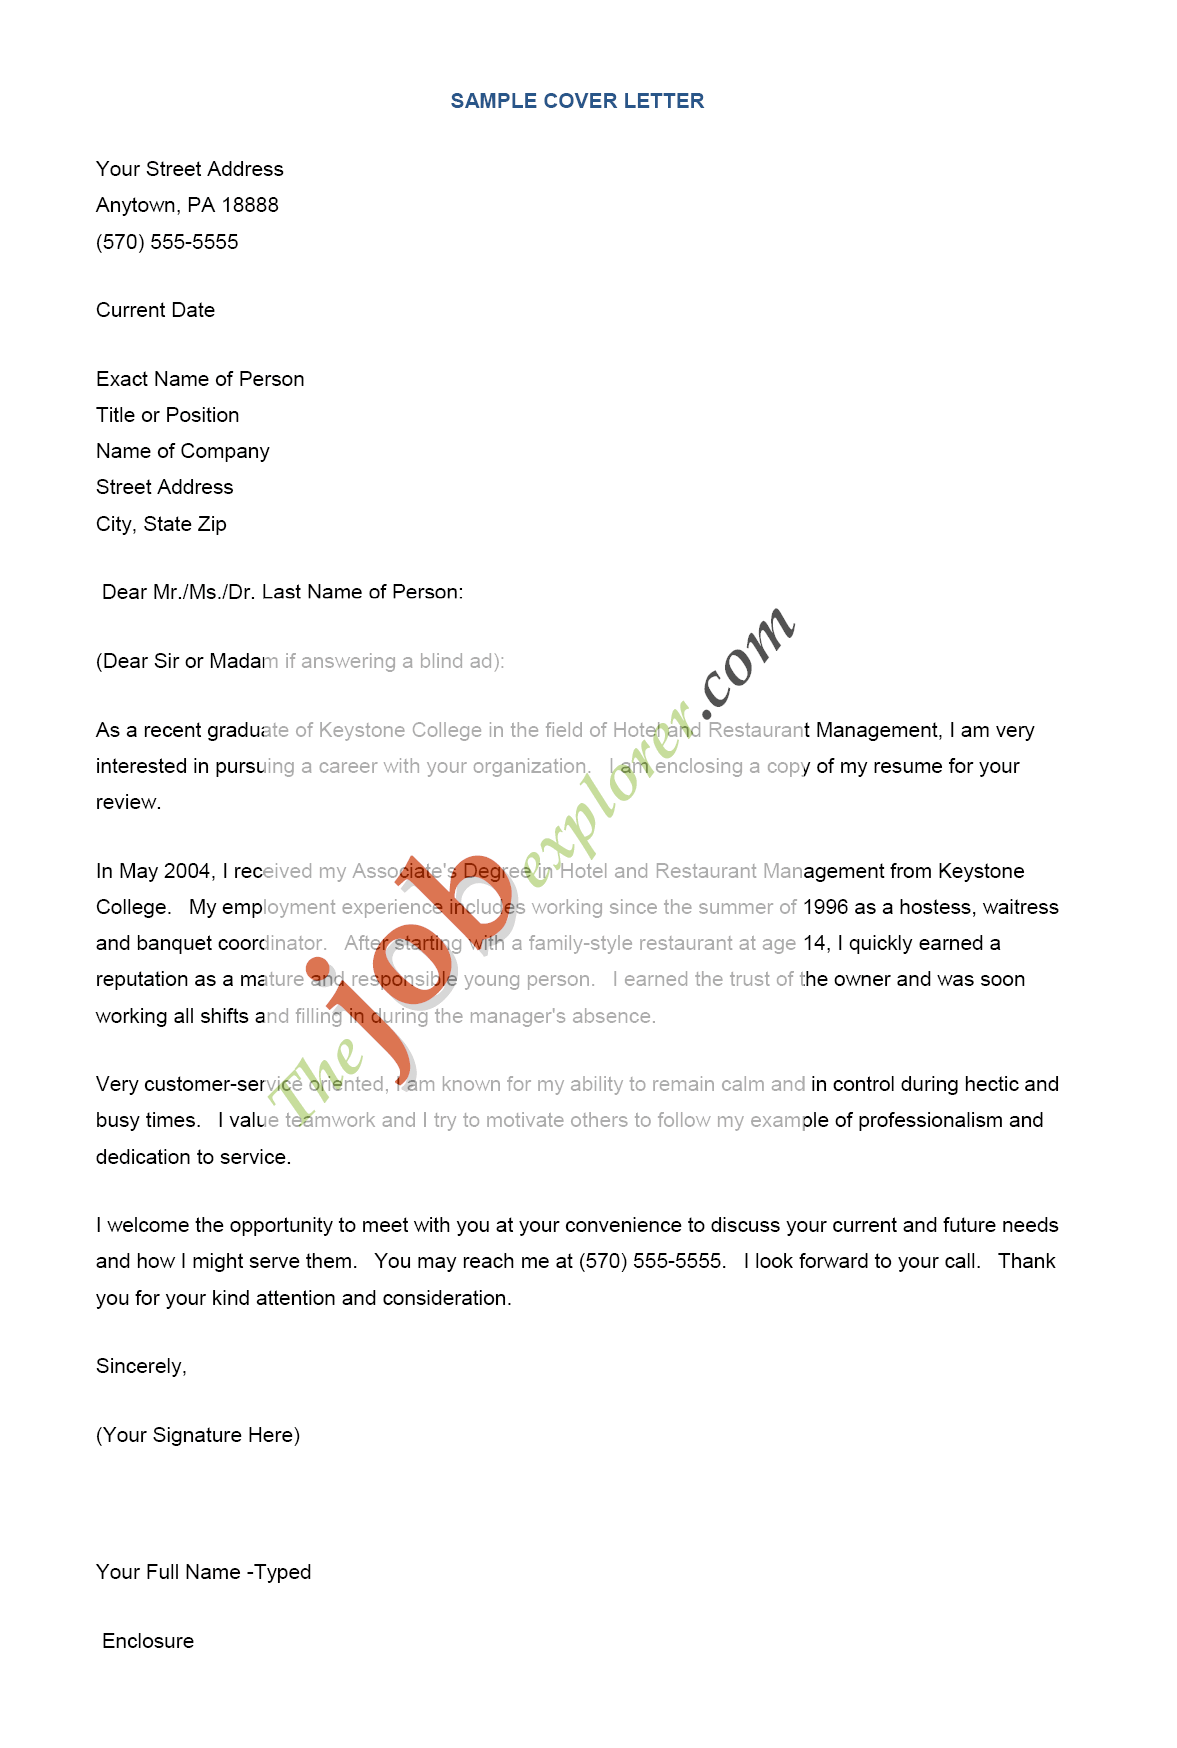 Free Cover Letter Examples and Writing Tips - Job Searching